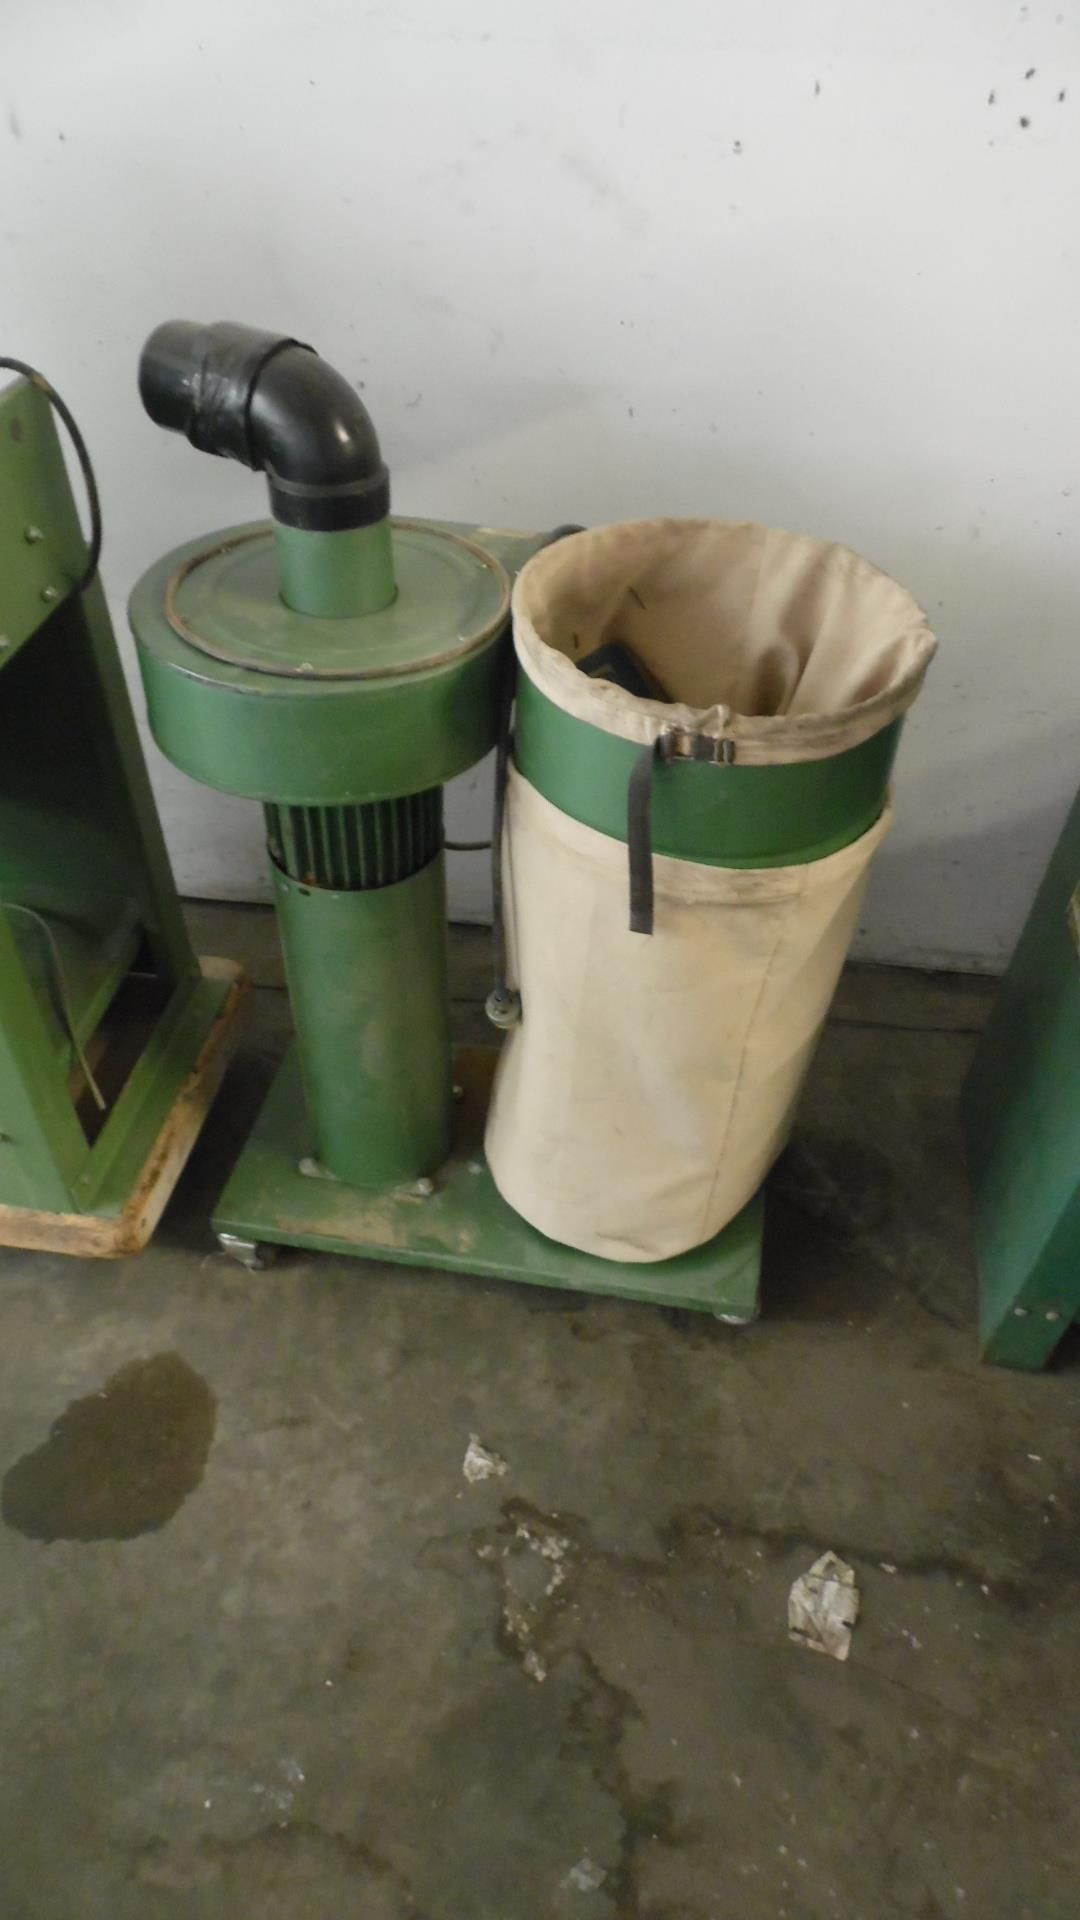 DUST COLLECTION SYSTEM